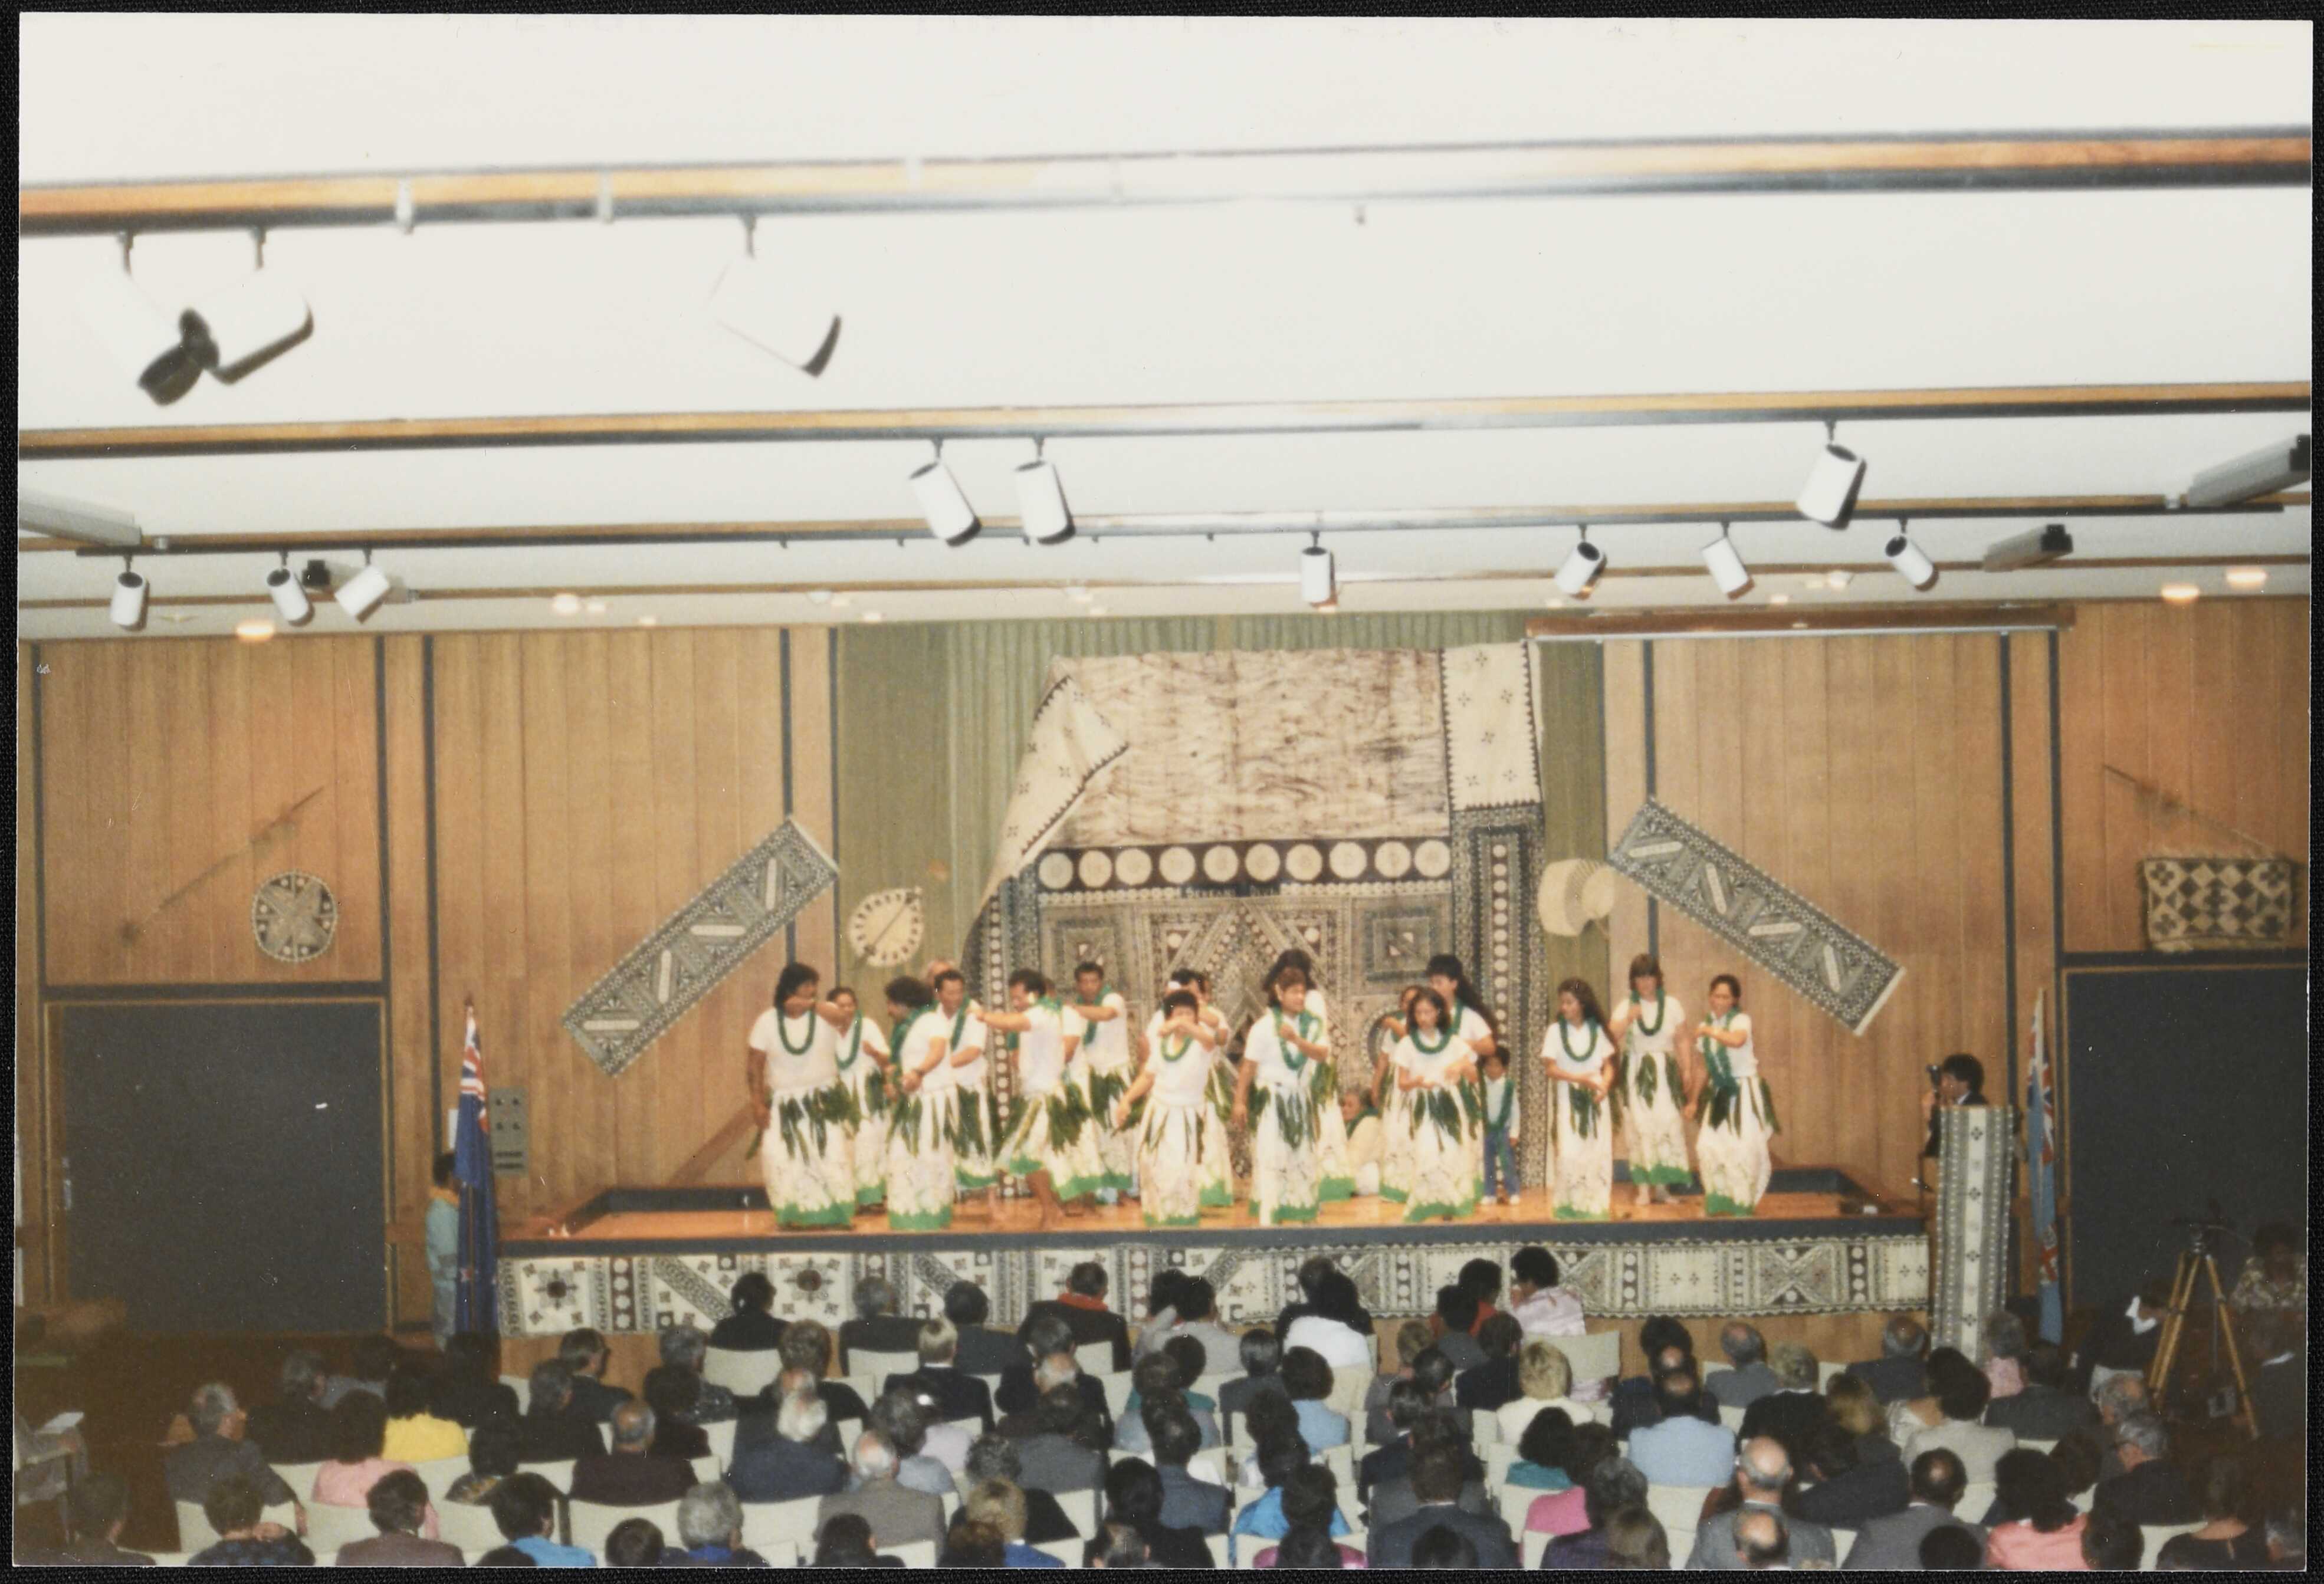 "Fiji "Cession" Day celebrations. Auckland Domain, 1986. Rotuman tautonga" 
Archives NZ Item Code: R431560 File 5